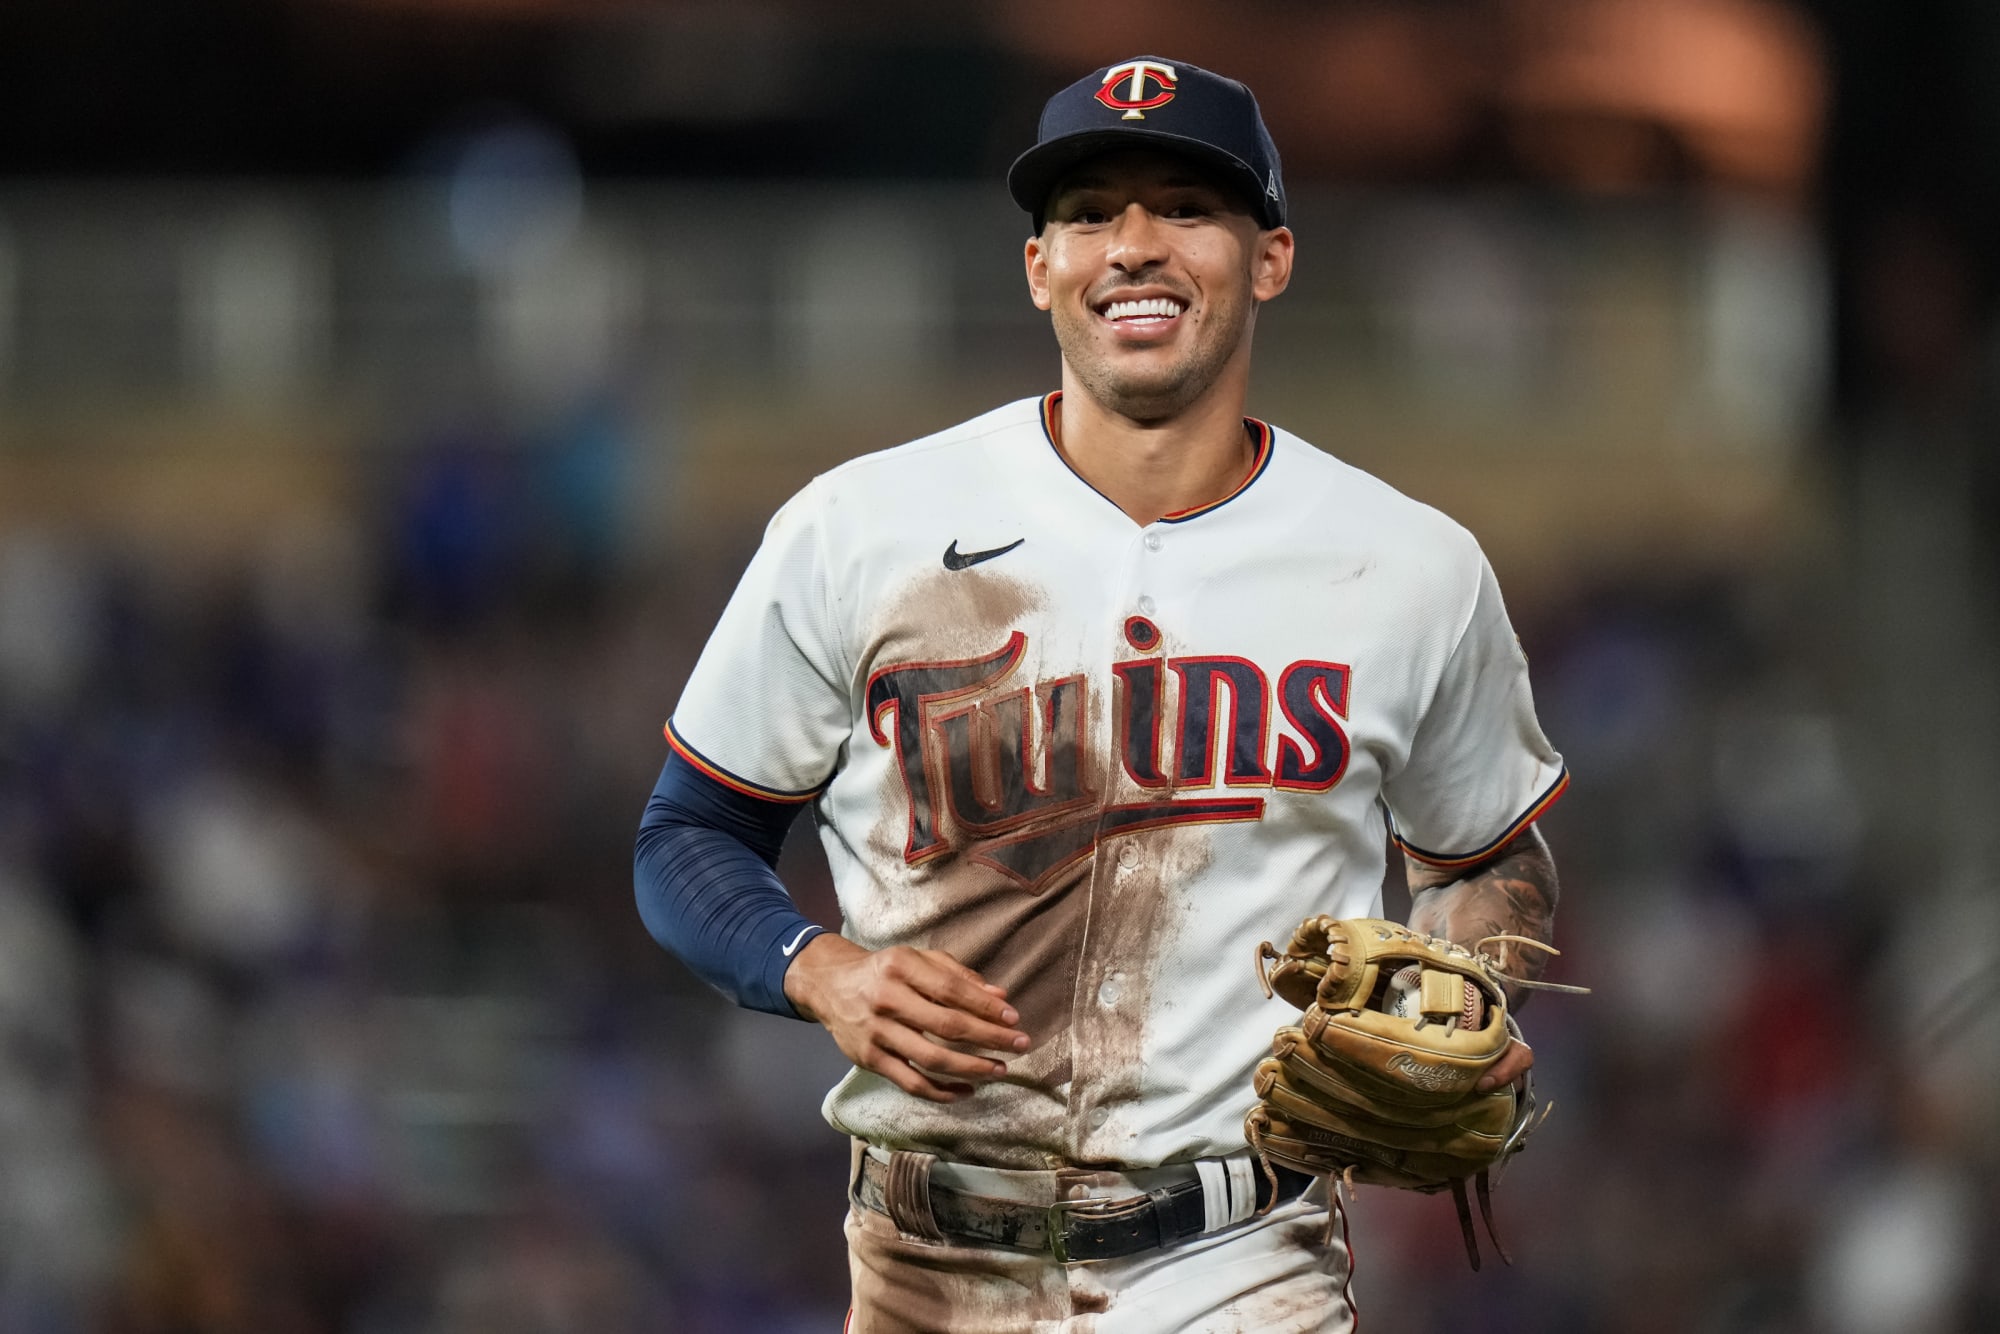 Carlos Correa gives Twins fans a glimmer of hope about his future